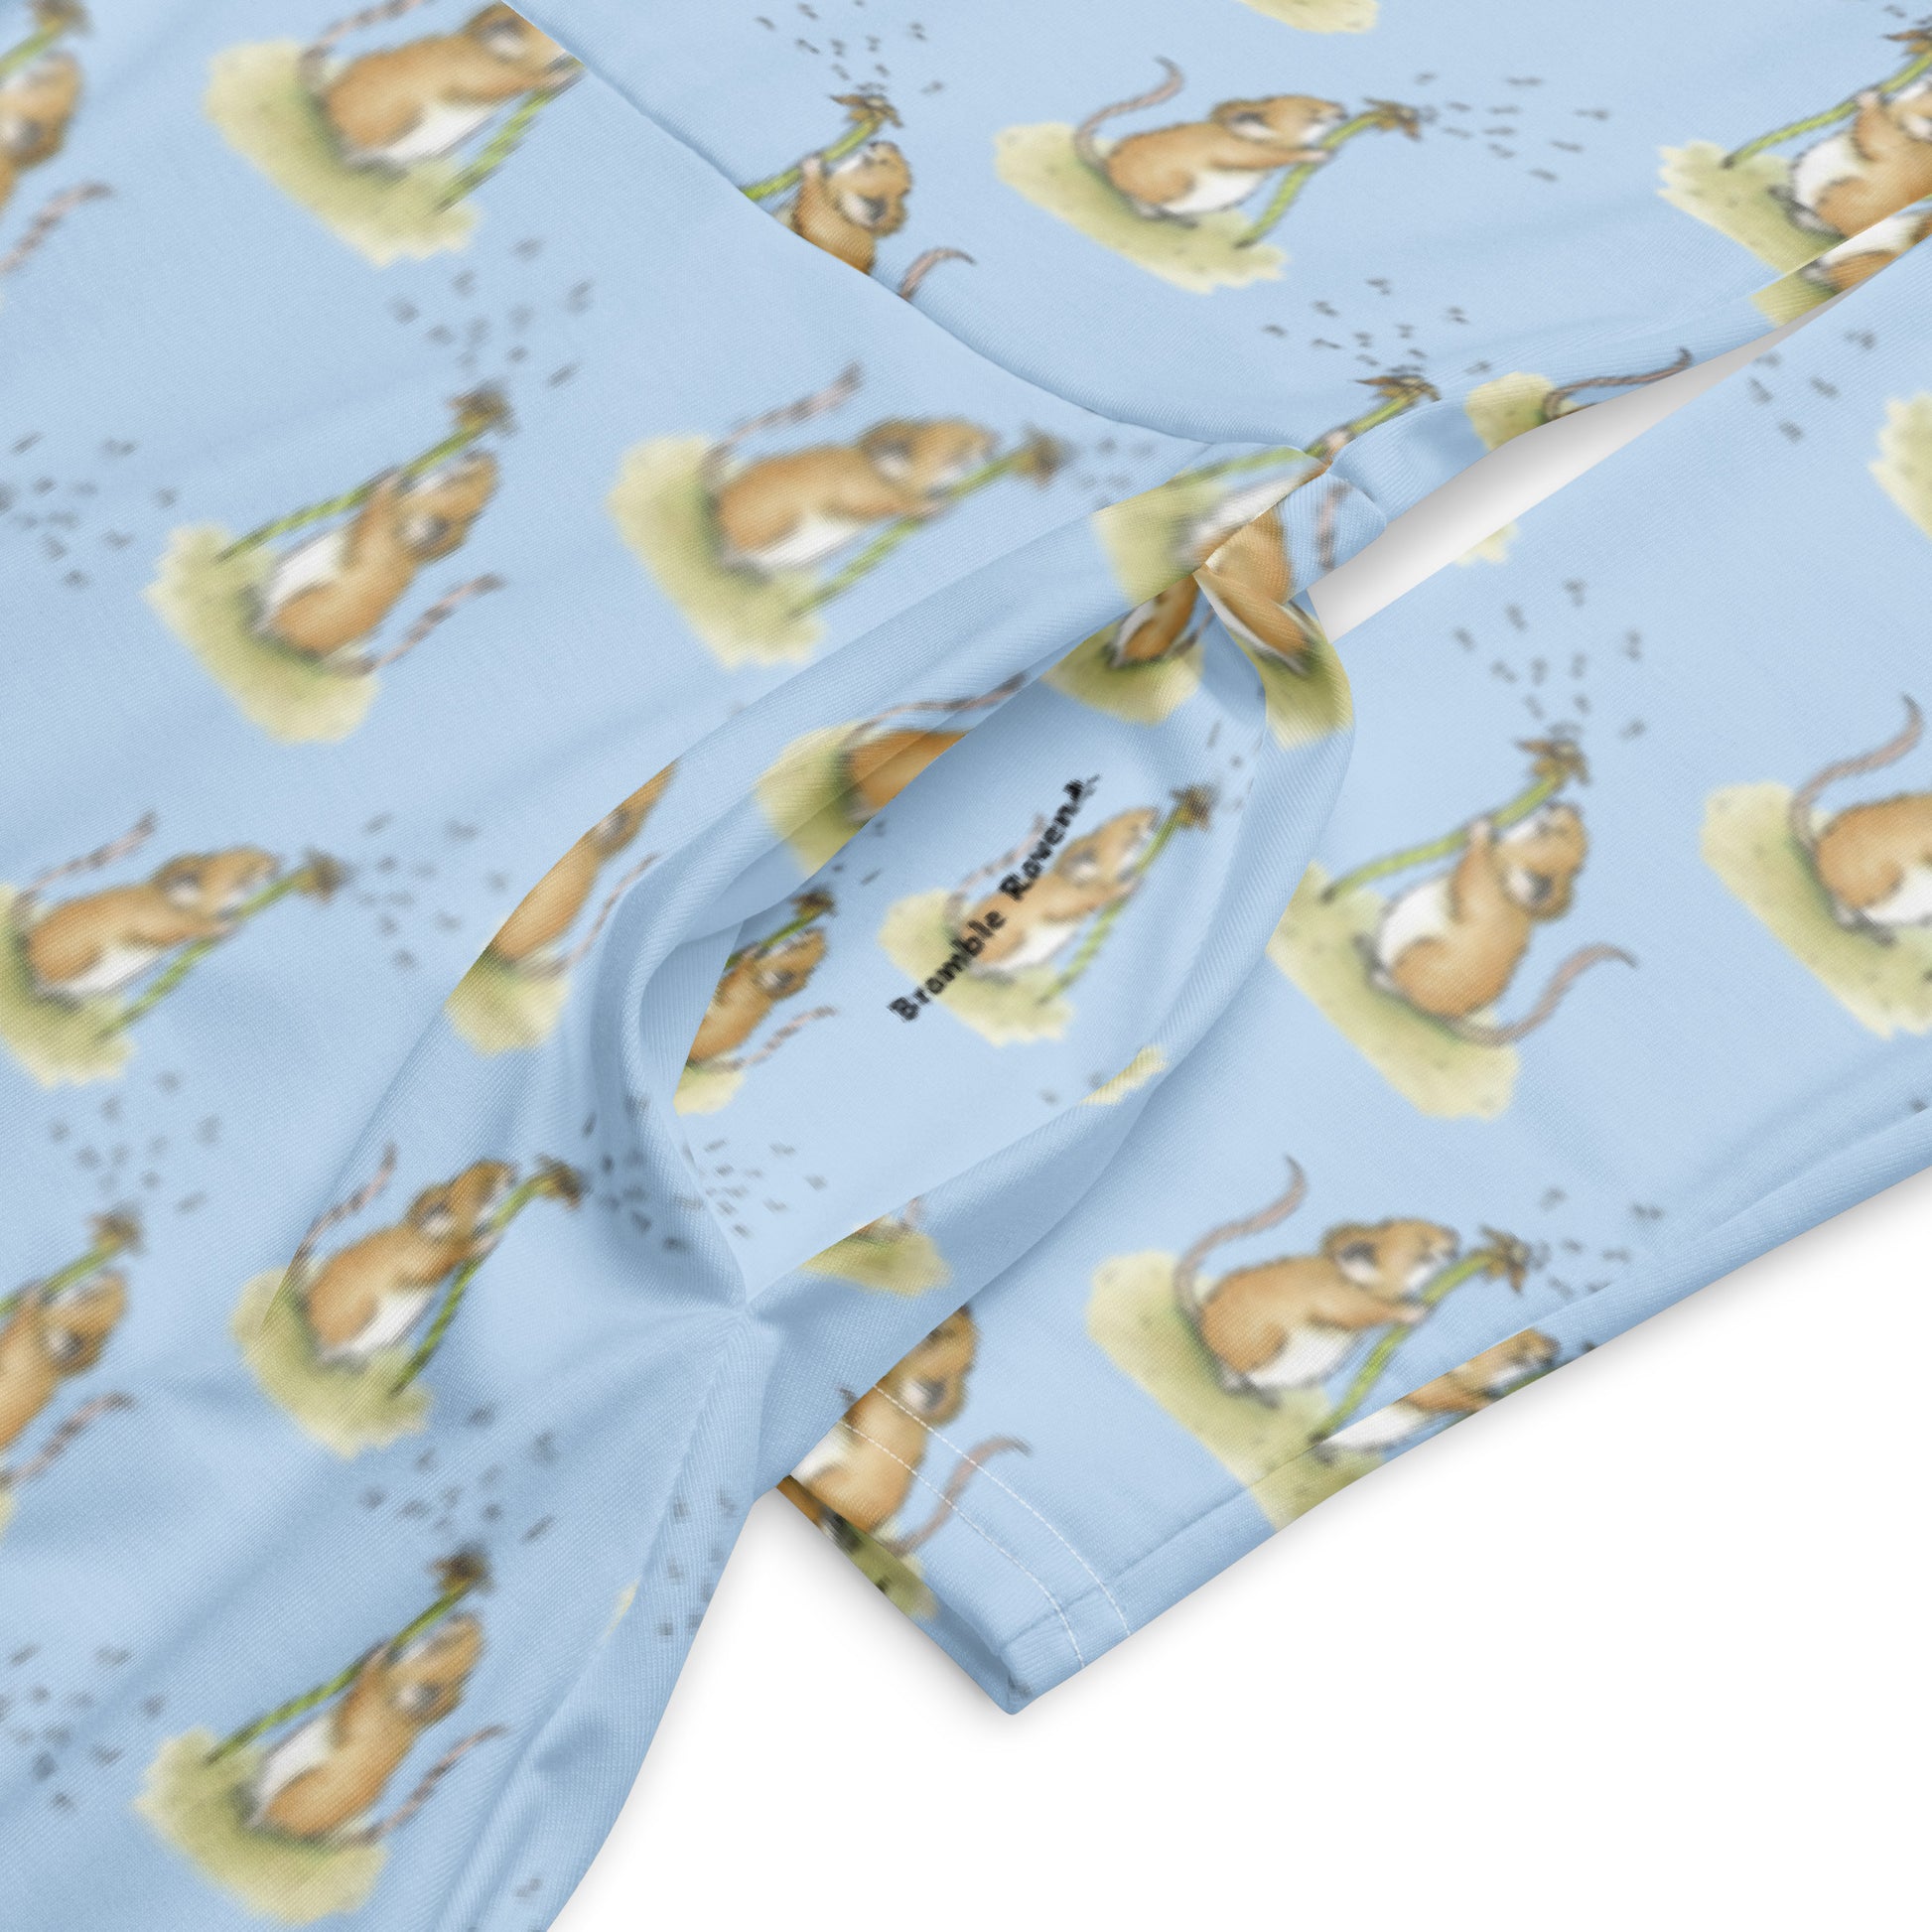 Dandelion Wish patterned long sleeve midi dress. Features patterned design of a mouse making a wish on a dandelion fluff against a light blue background. Dress has boat neckline, fitted waist, flared bottom, and side pockets. Detail image of pocket with Bramble Raven logo.